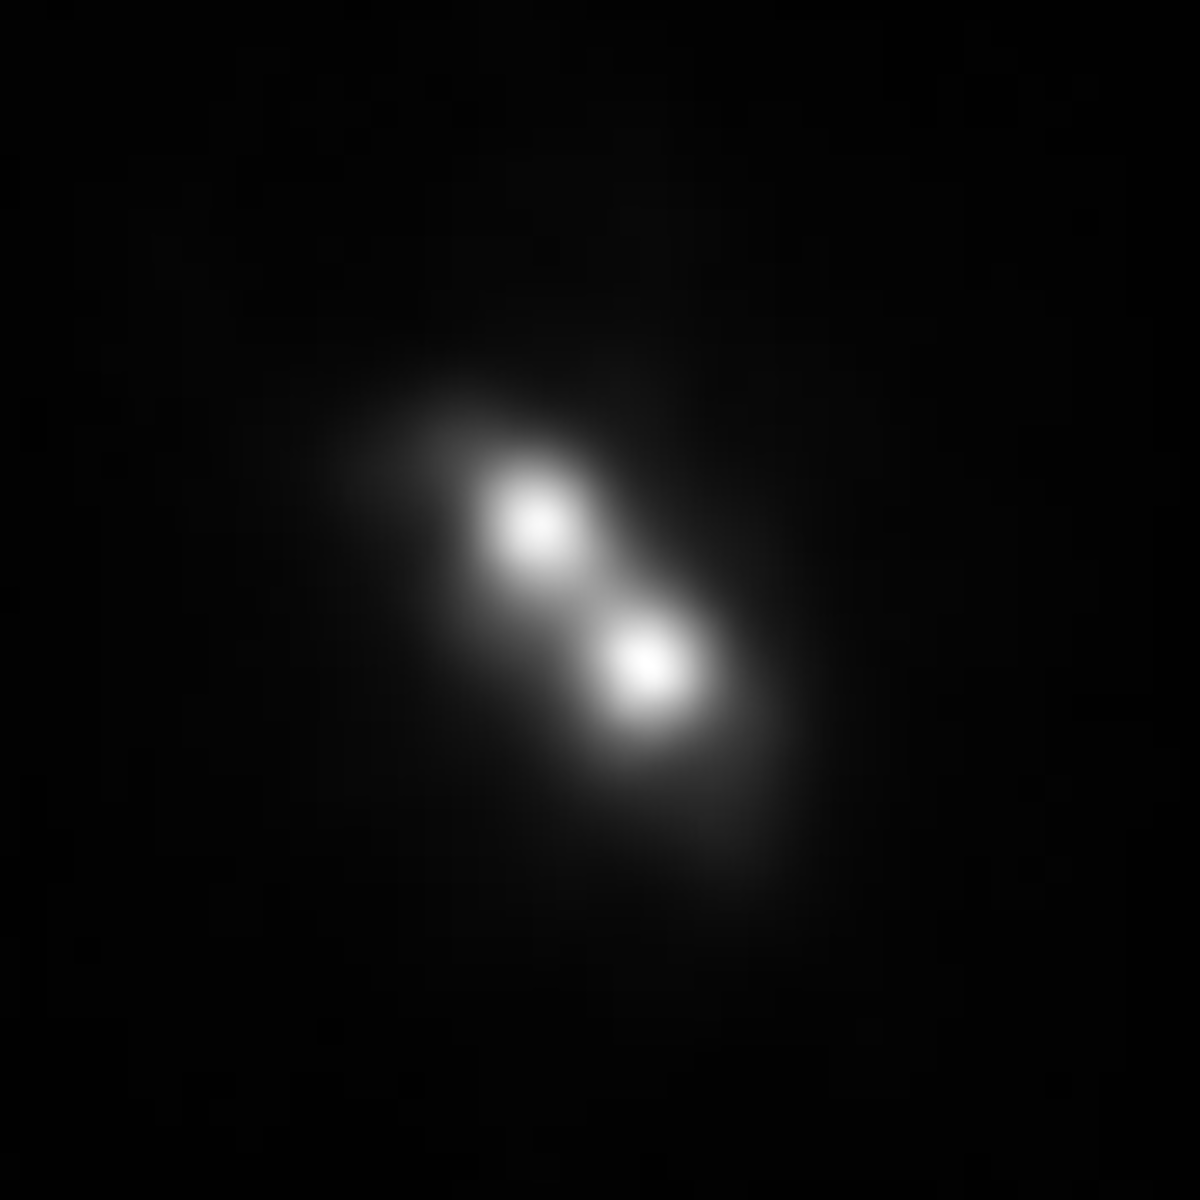 Binary asteroid thought to be one object